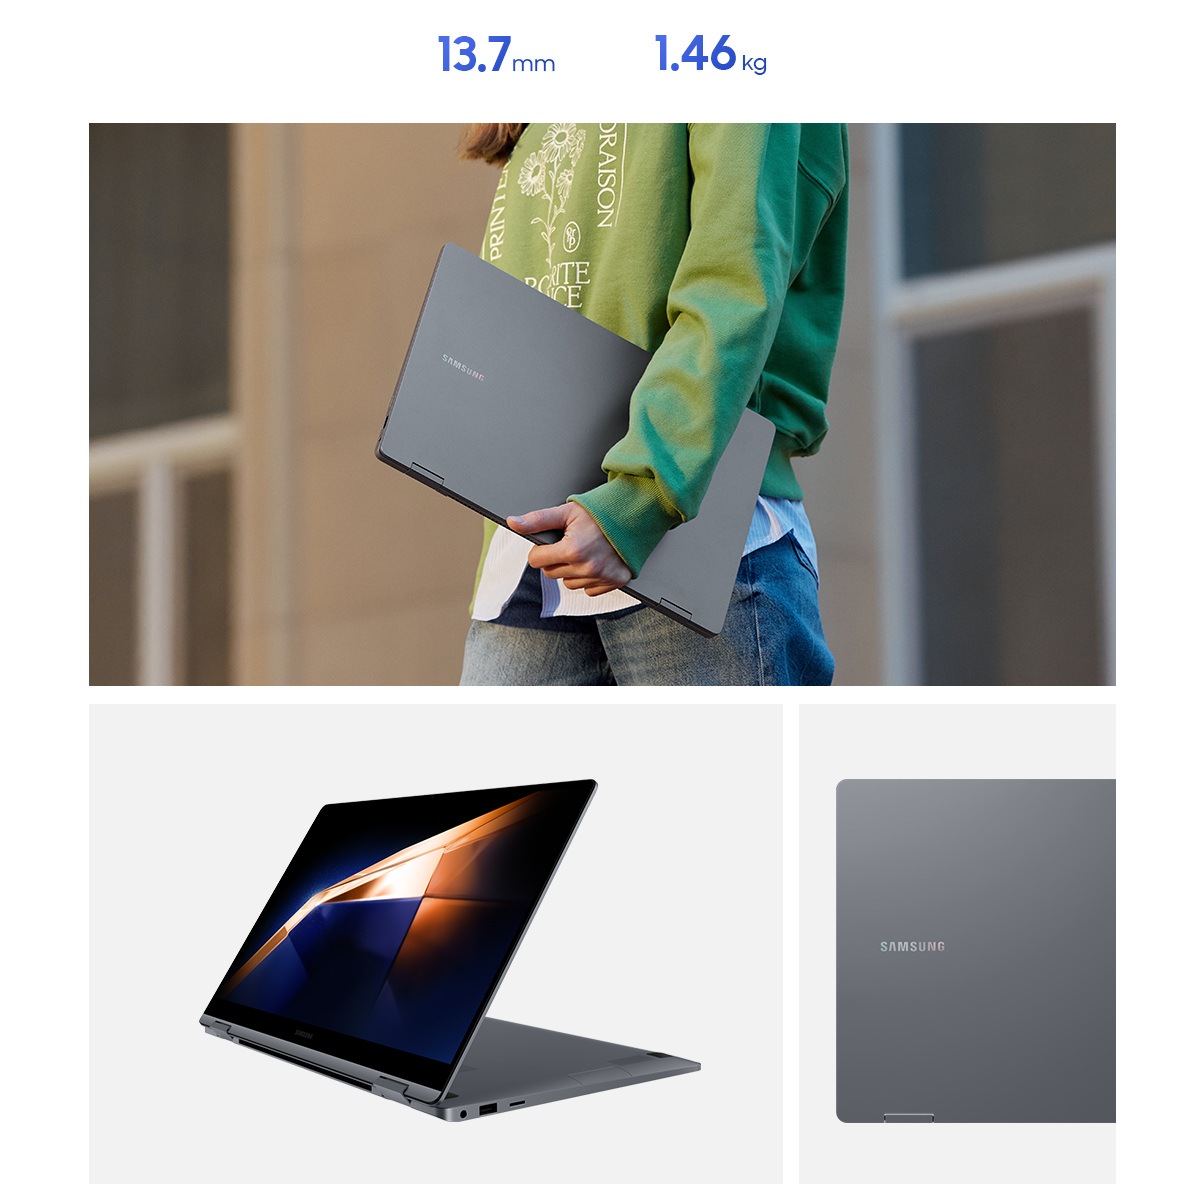 A young woman is carrying Galaxy Book4 360 in one arm while walking outdoors. Galaxy Book4 360 in Gray is folded halfway back, facing left with a dark blue and orange wallpaper onscreen. Close-up view of the Samsung logo on the cover of Galaxy Book4 360 in Gray. Galaxy Book4 360 has thickness of 13.7mm and weighs 1.46kg.